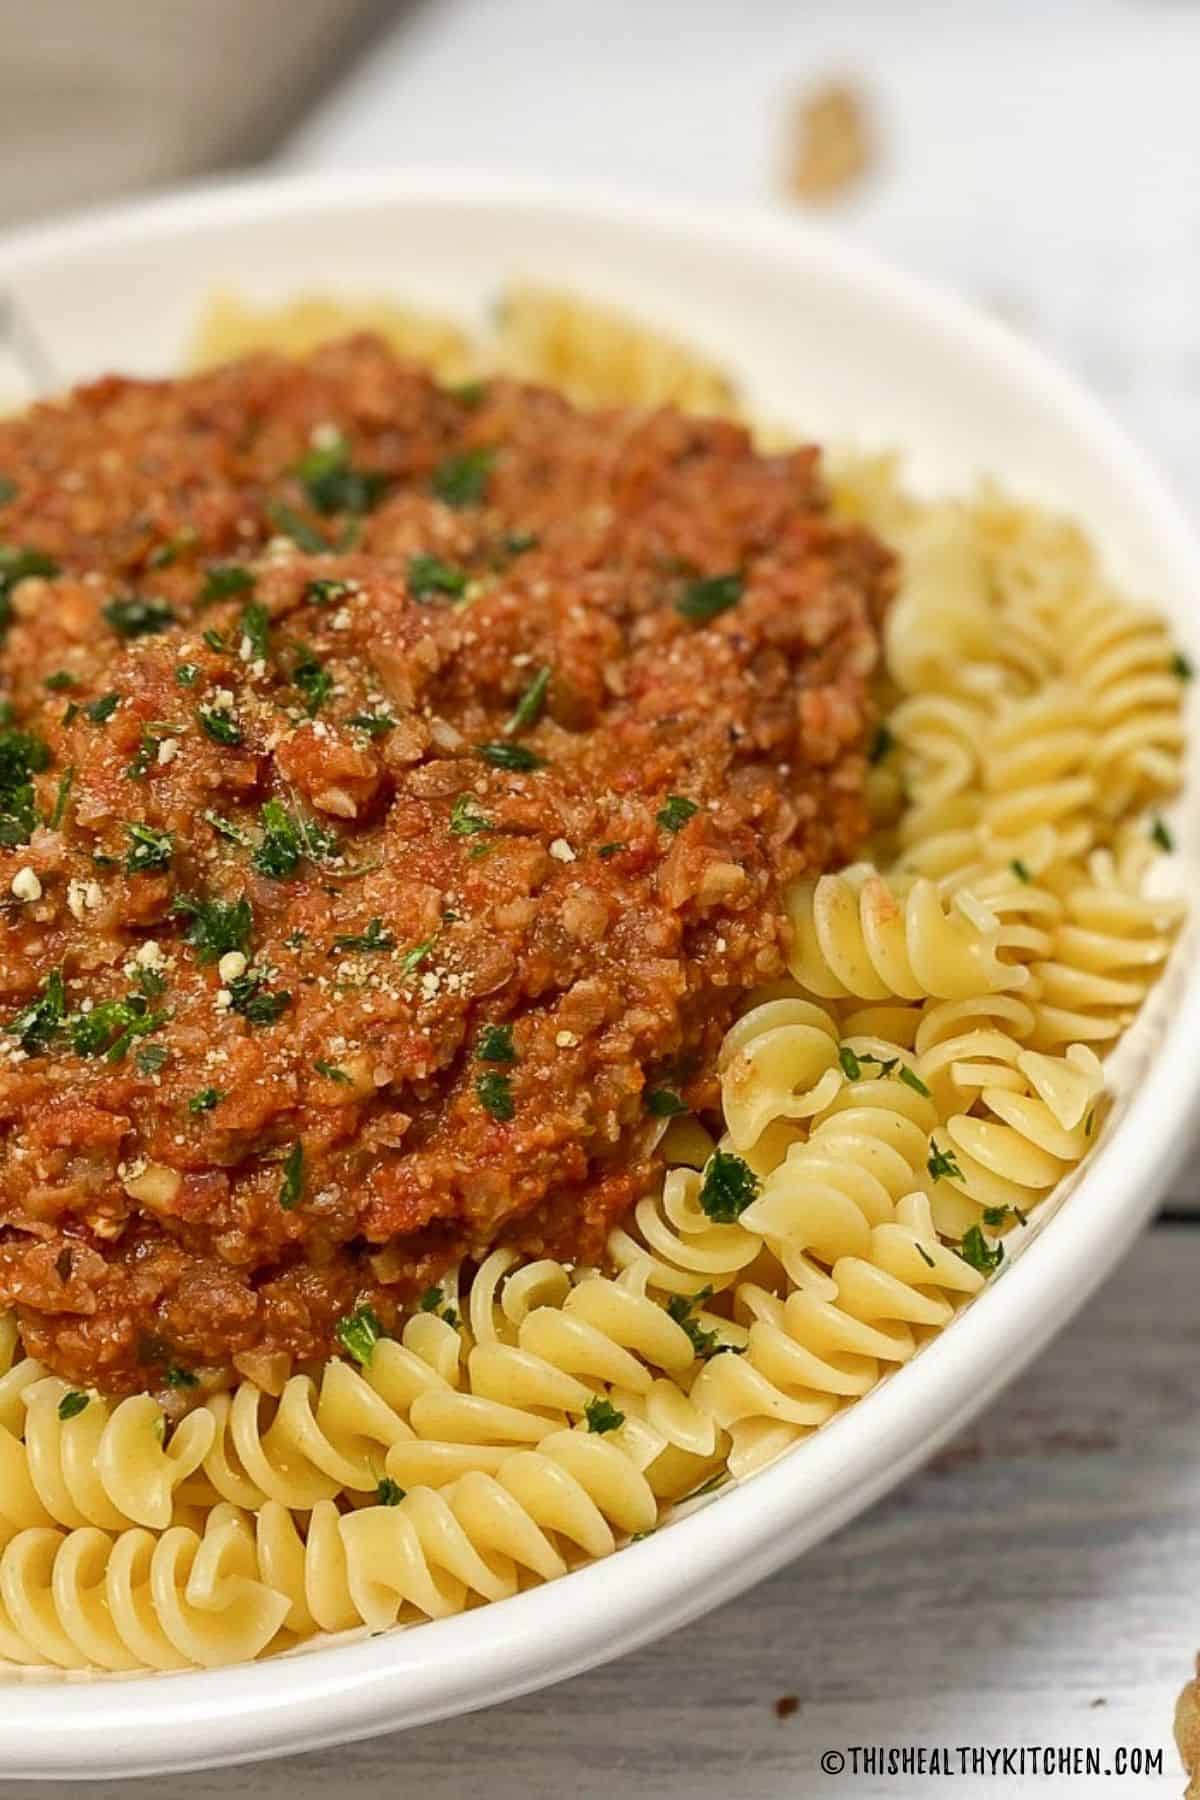 Rotini pasta with cauliflower bolognese sauce on top.